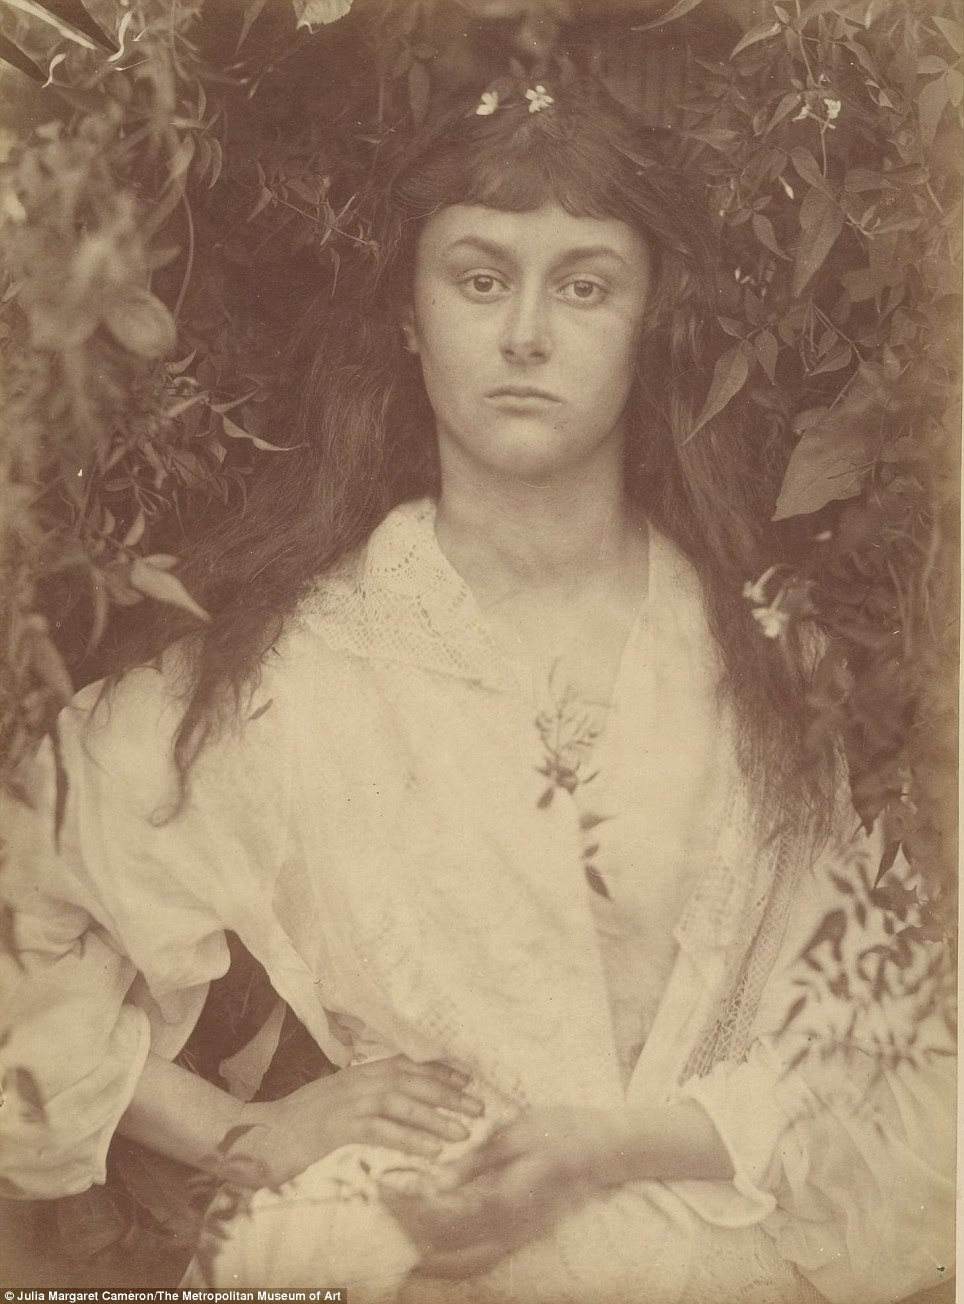 Pomona: The Roman goddess of gardens and fruit trees. Here, Alice Liddell (1852¿1934) who, as a child, was Lewis Carroll¿s muse and frequent photographic model - posed for Cameron a dozen times in August and September 1872